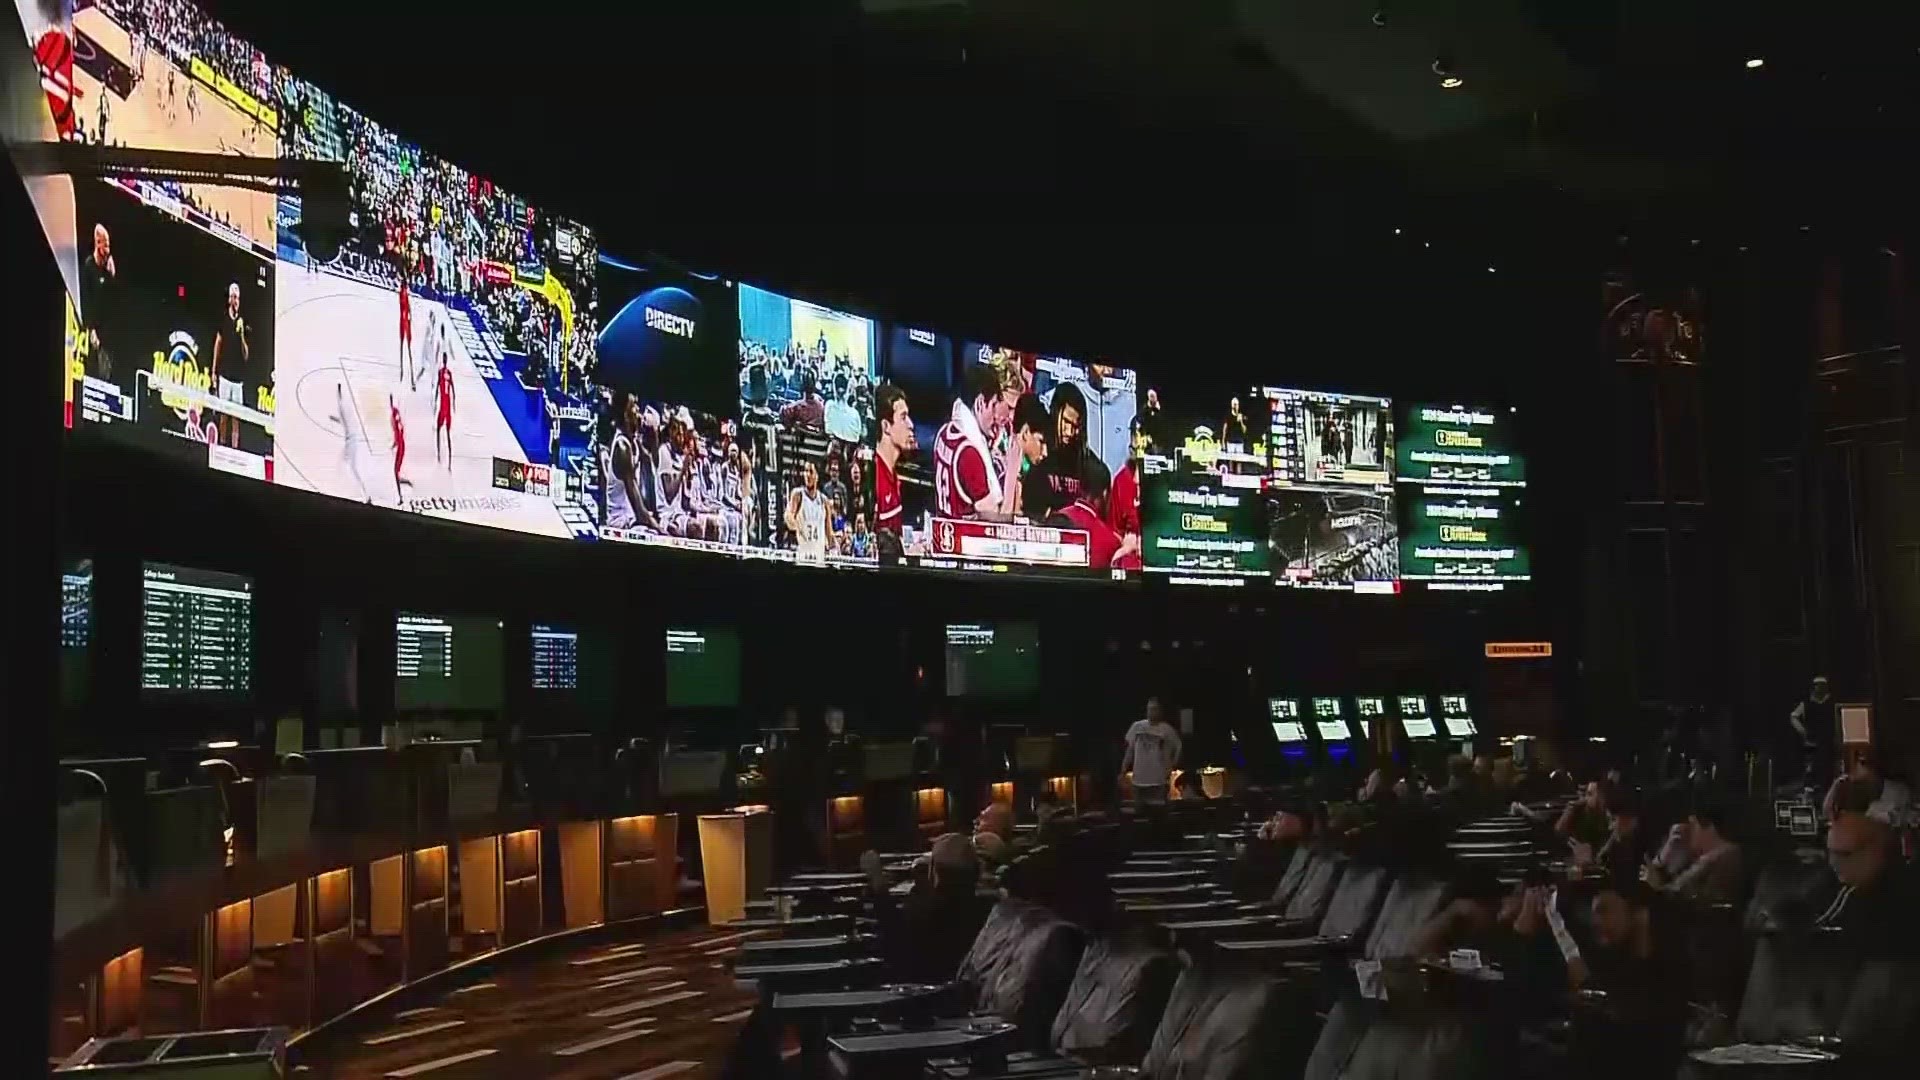 Inside the Caesars Sports Book, bets are always rolling in, but nothing compares to what goes down on Super Bowl Sunday.